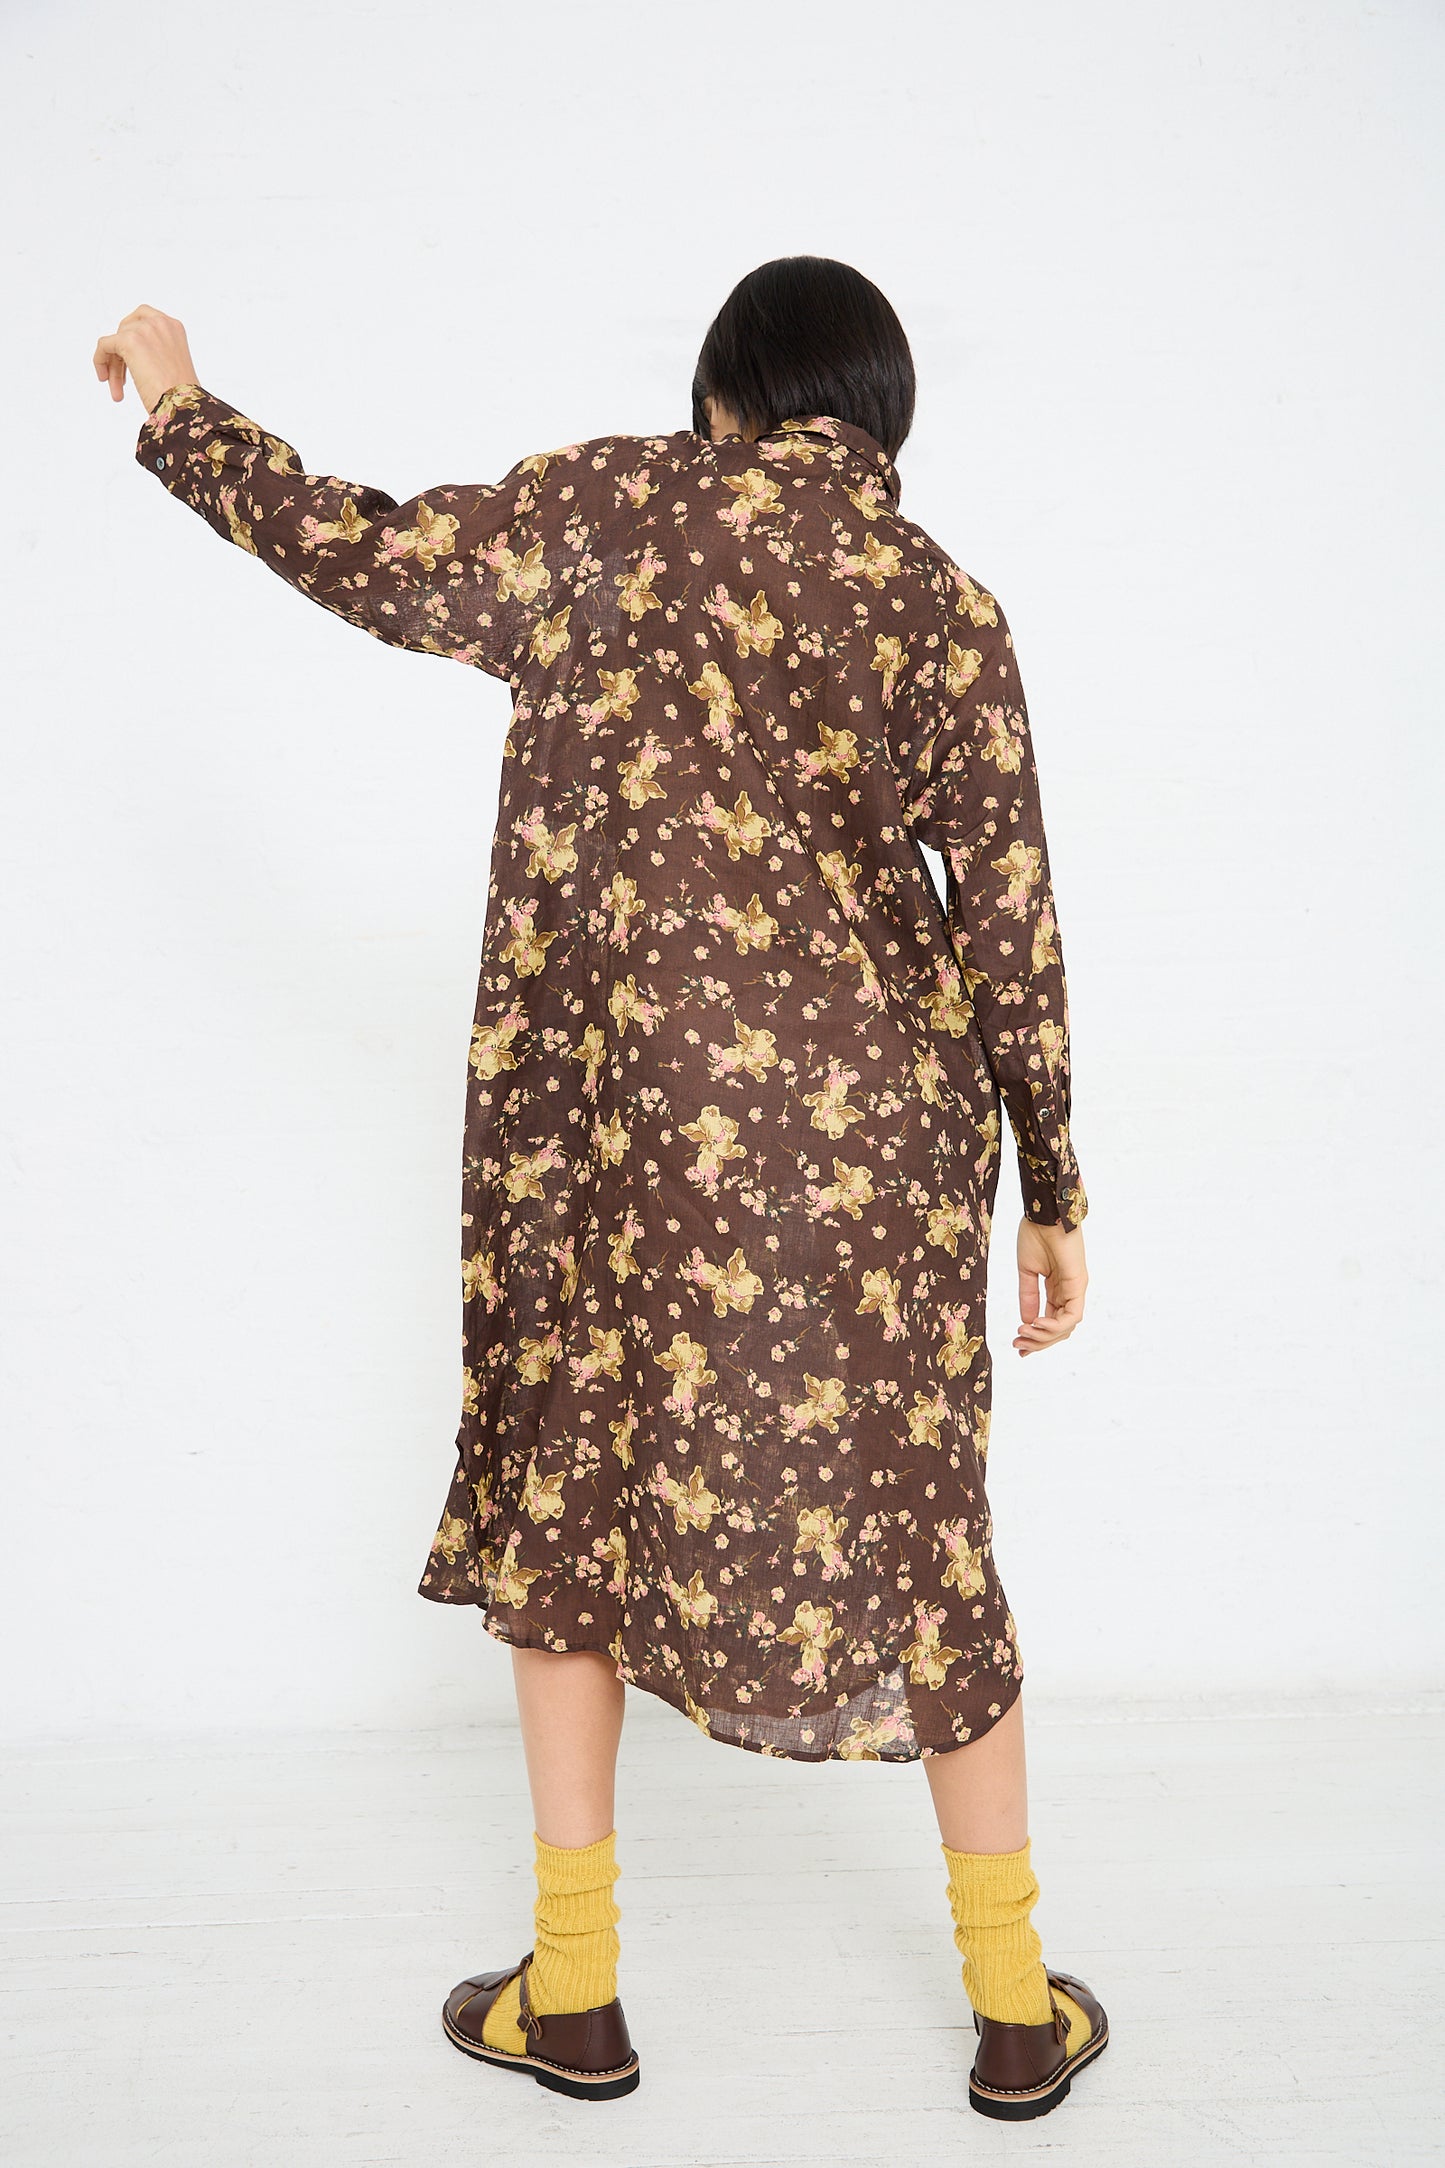 A person stands with their back to the camera, wearing a long, dark brown Linen Flower Print Dress in Brown by Ichi Antiquités, yellow socks, and brown shoes. They are raising one arm.